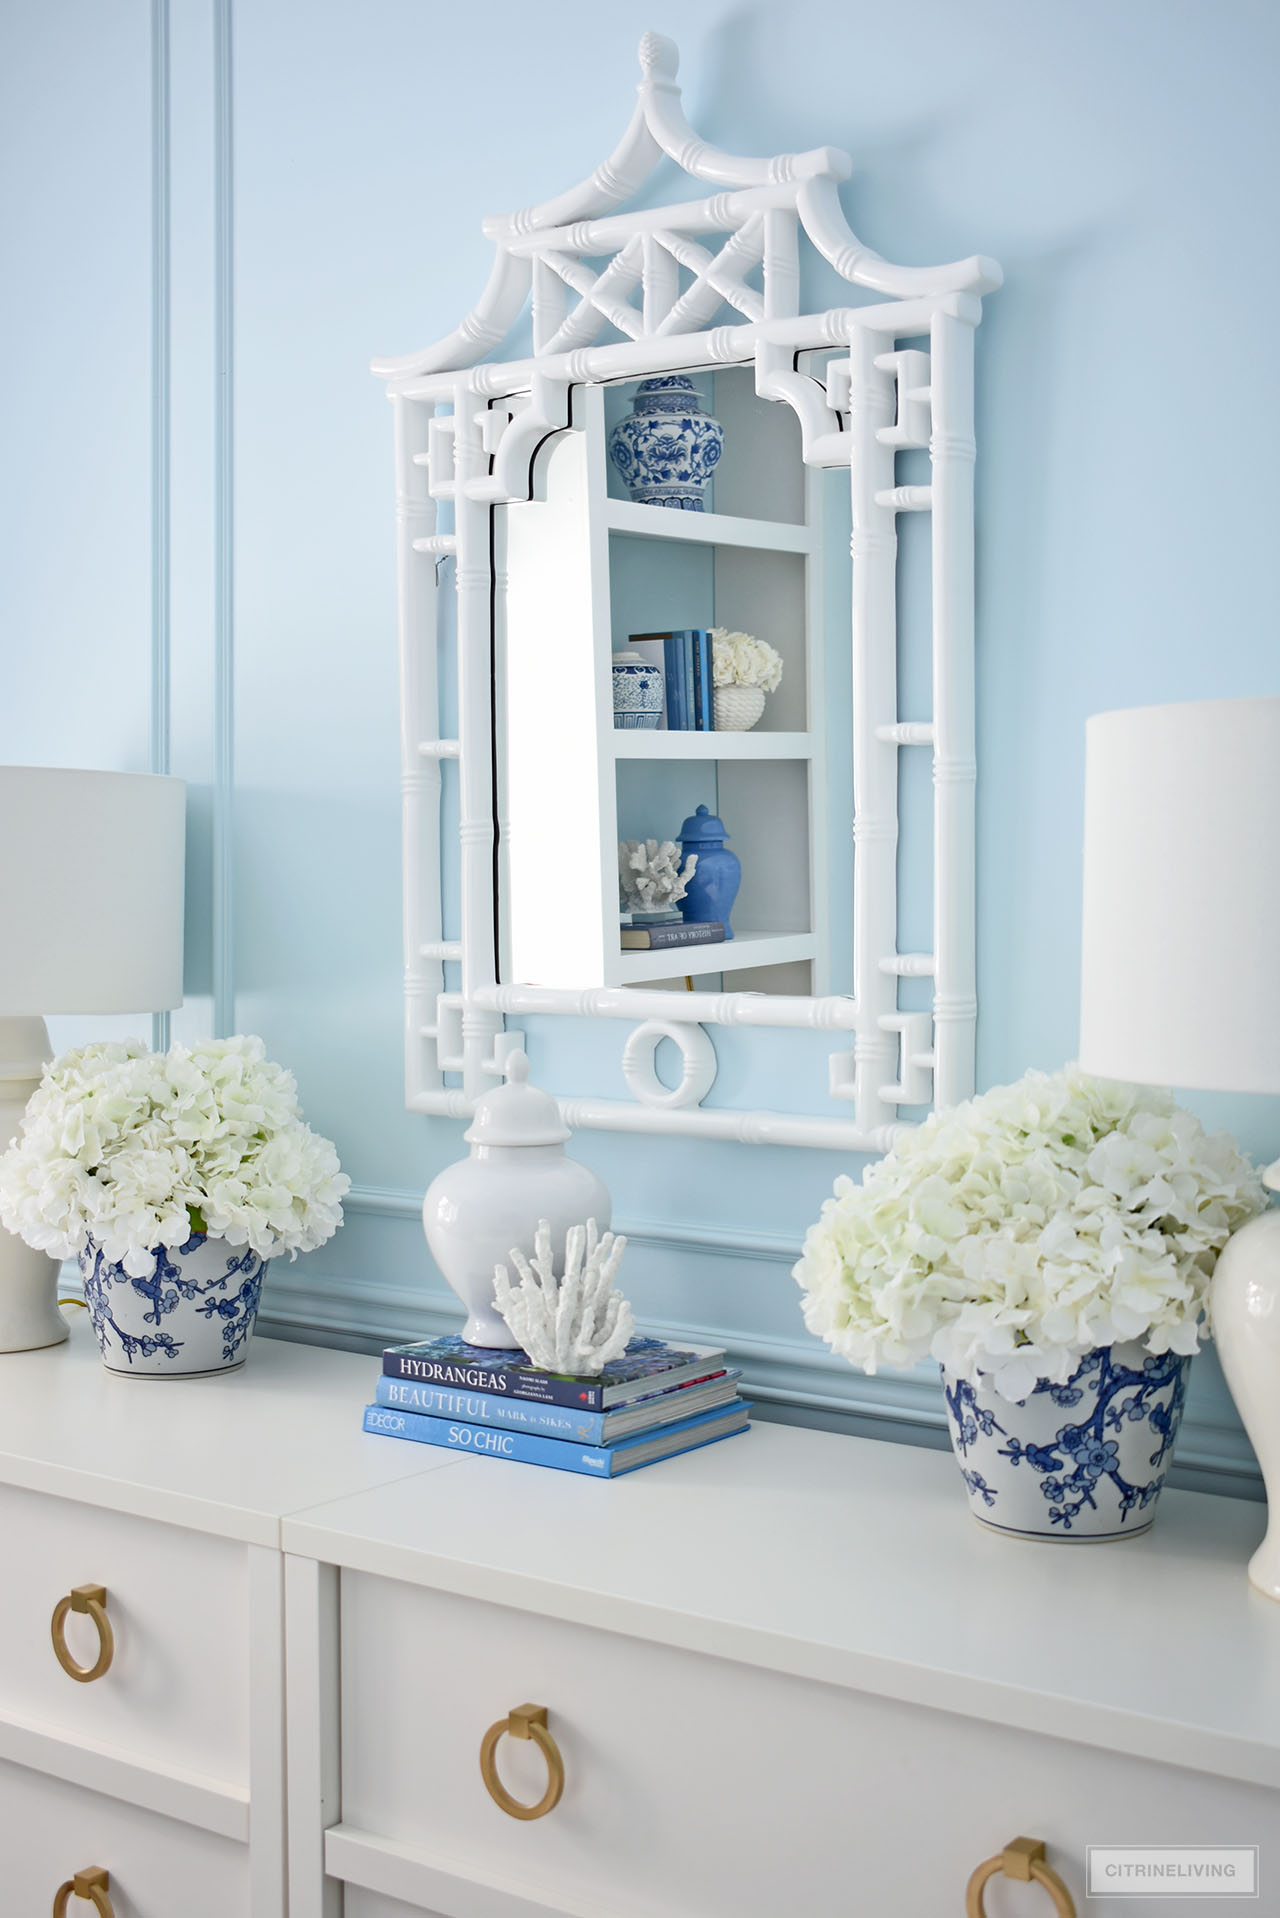 MIRROR IN ELEGANT HOME OFFICE IN BLUE + WHITE CHINOISERIE